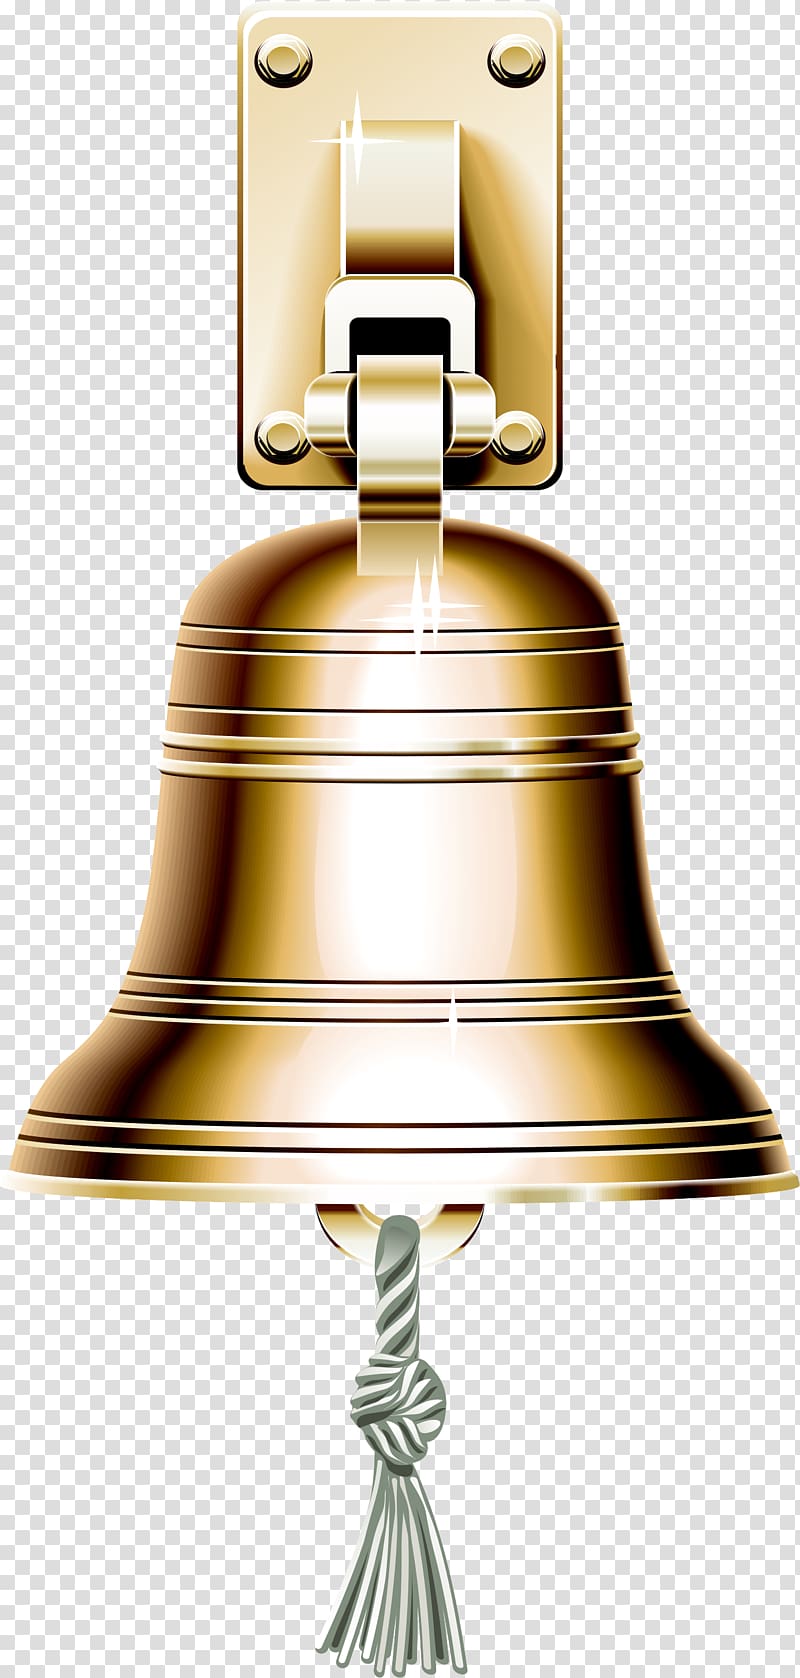 Church bell , bell transparent background PNG clipart